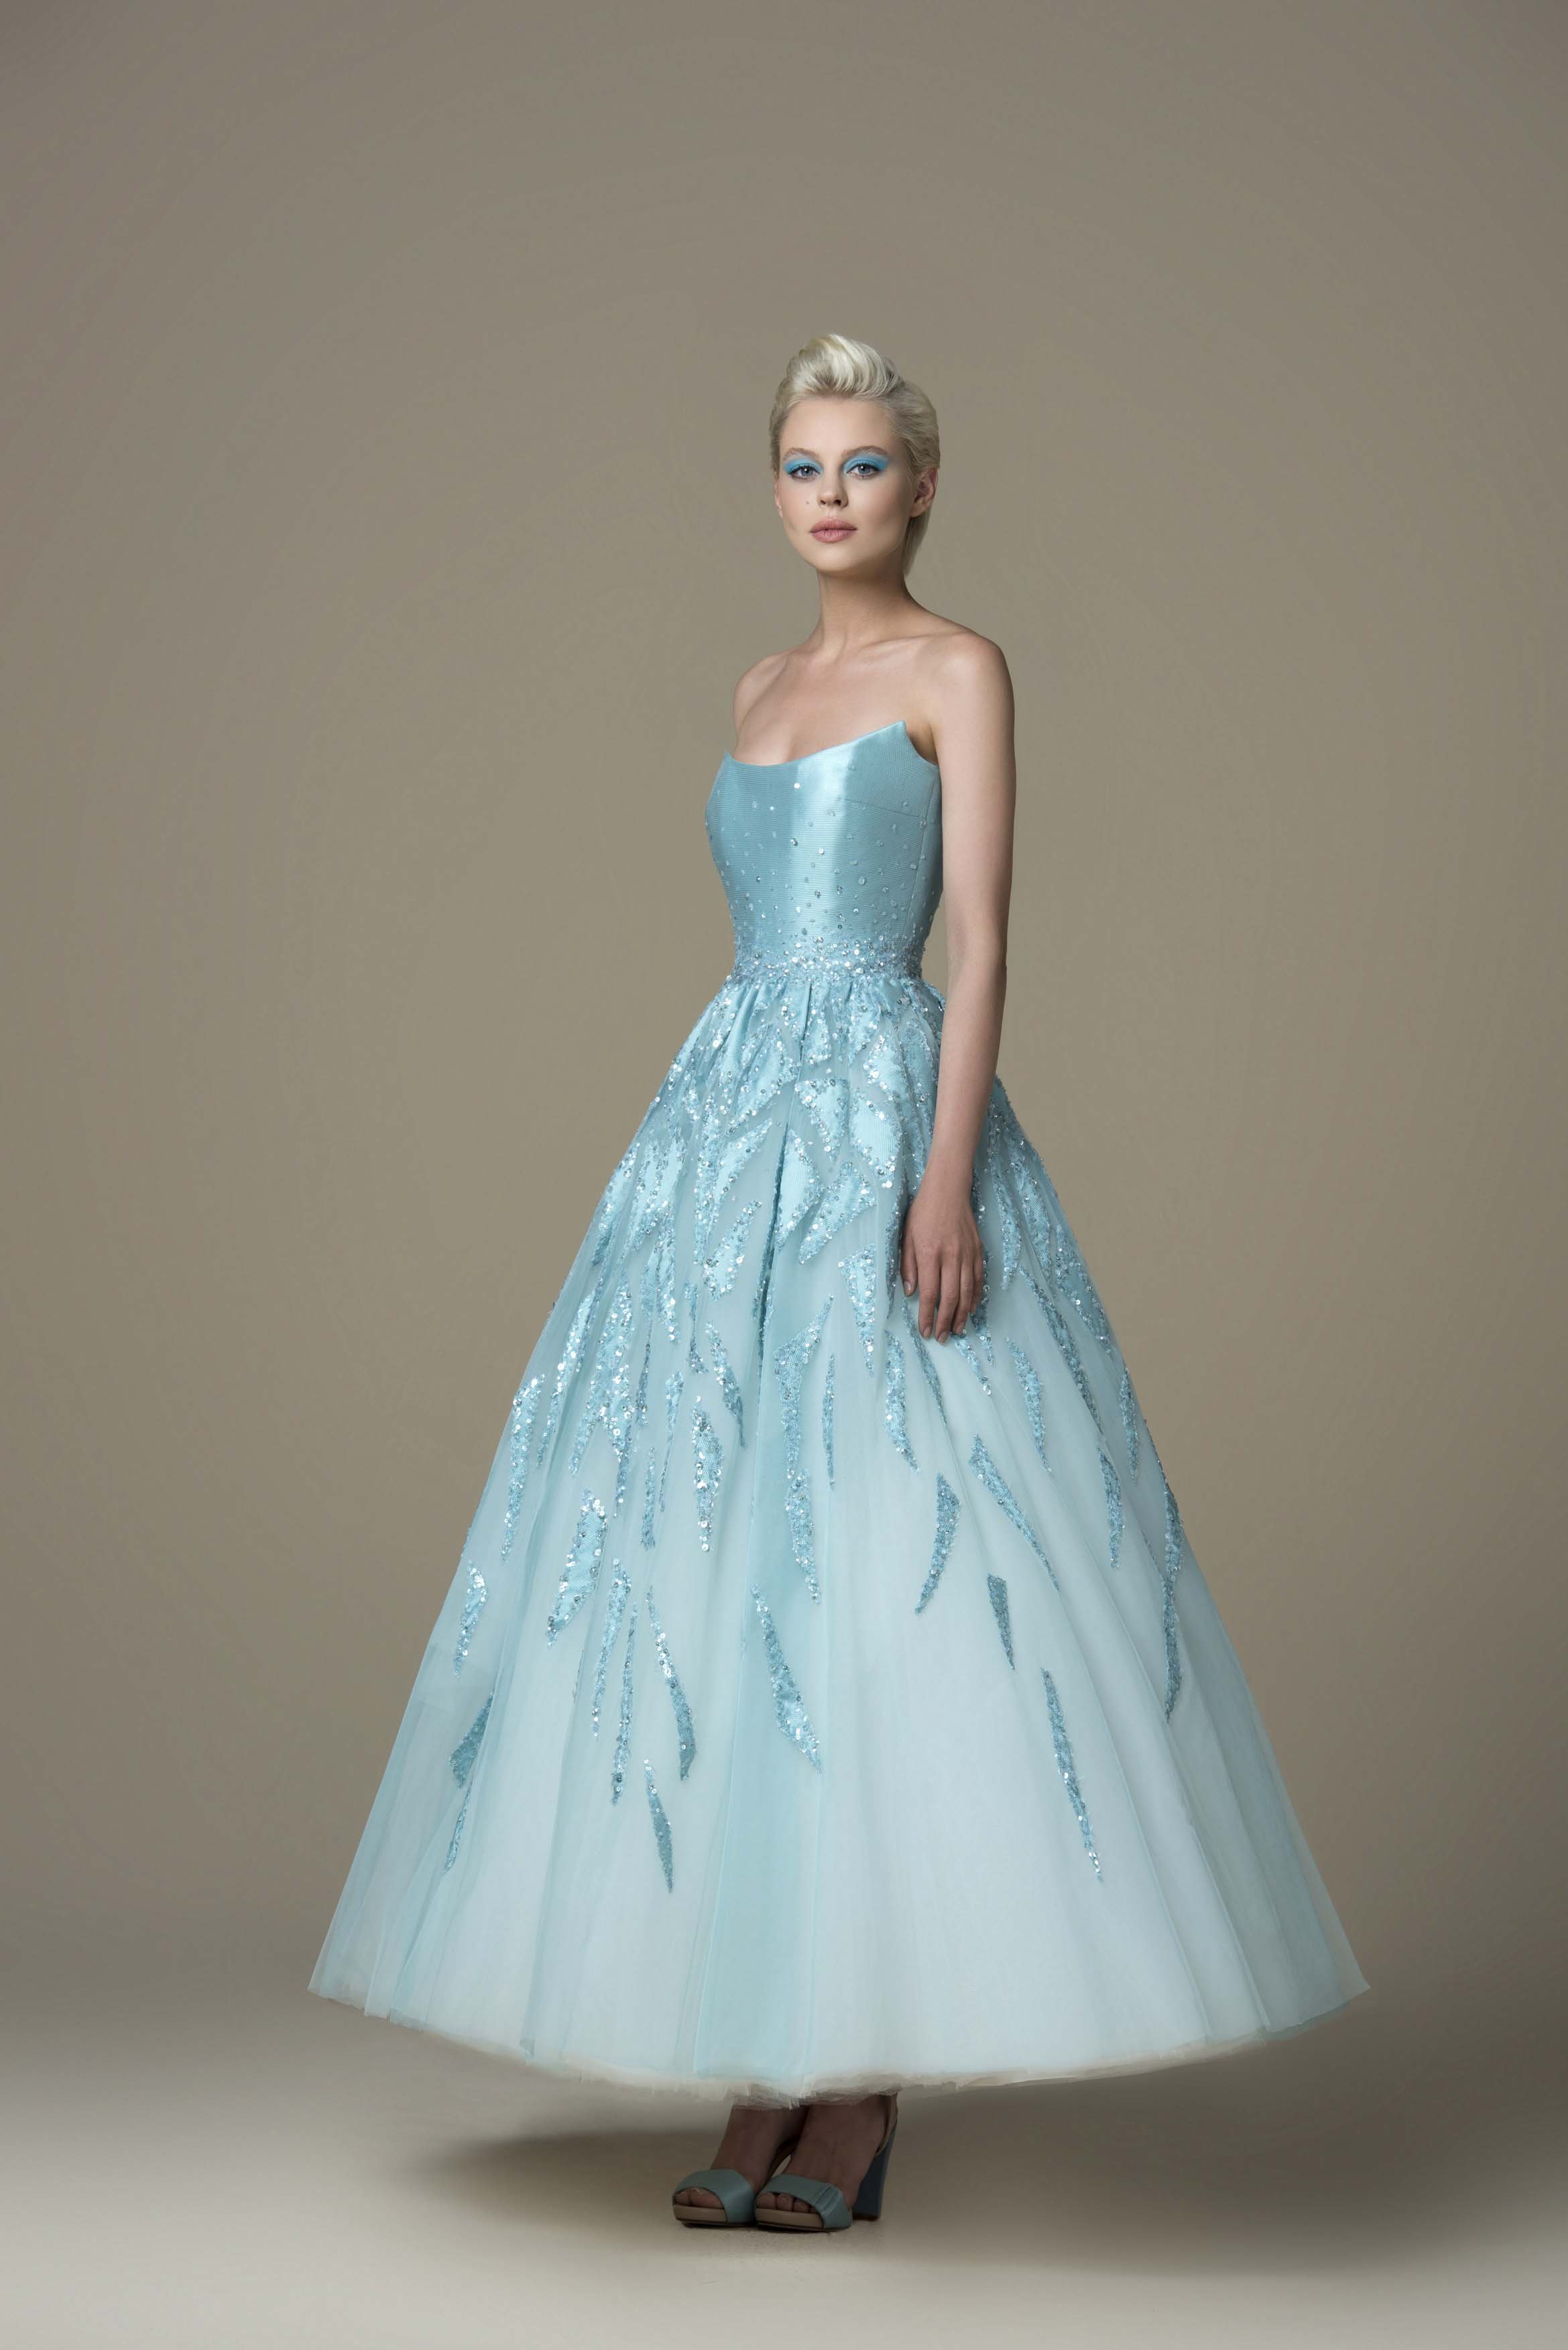 Saiid Kobeisy - RTWSS19-27 Bedazzled Tulle A-line Gown